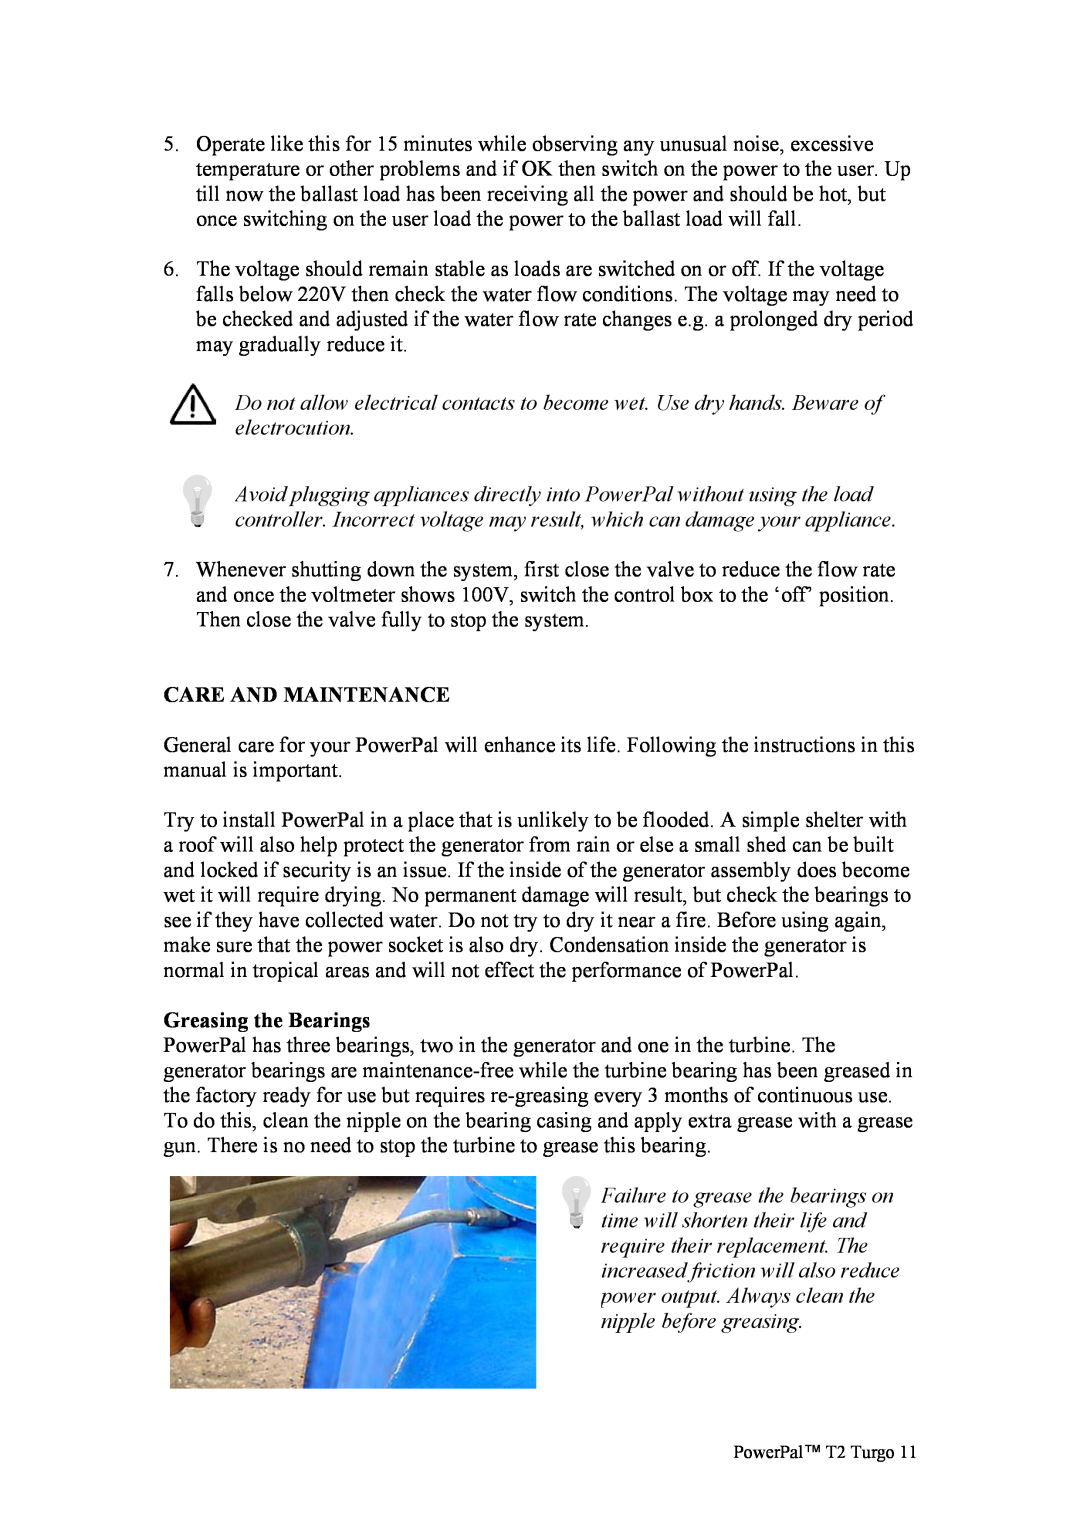 Asian Resources Int'l Limited MHG-T2 manual Care And Maintenance, Greasing the Bearings 